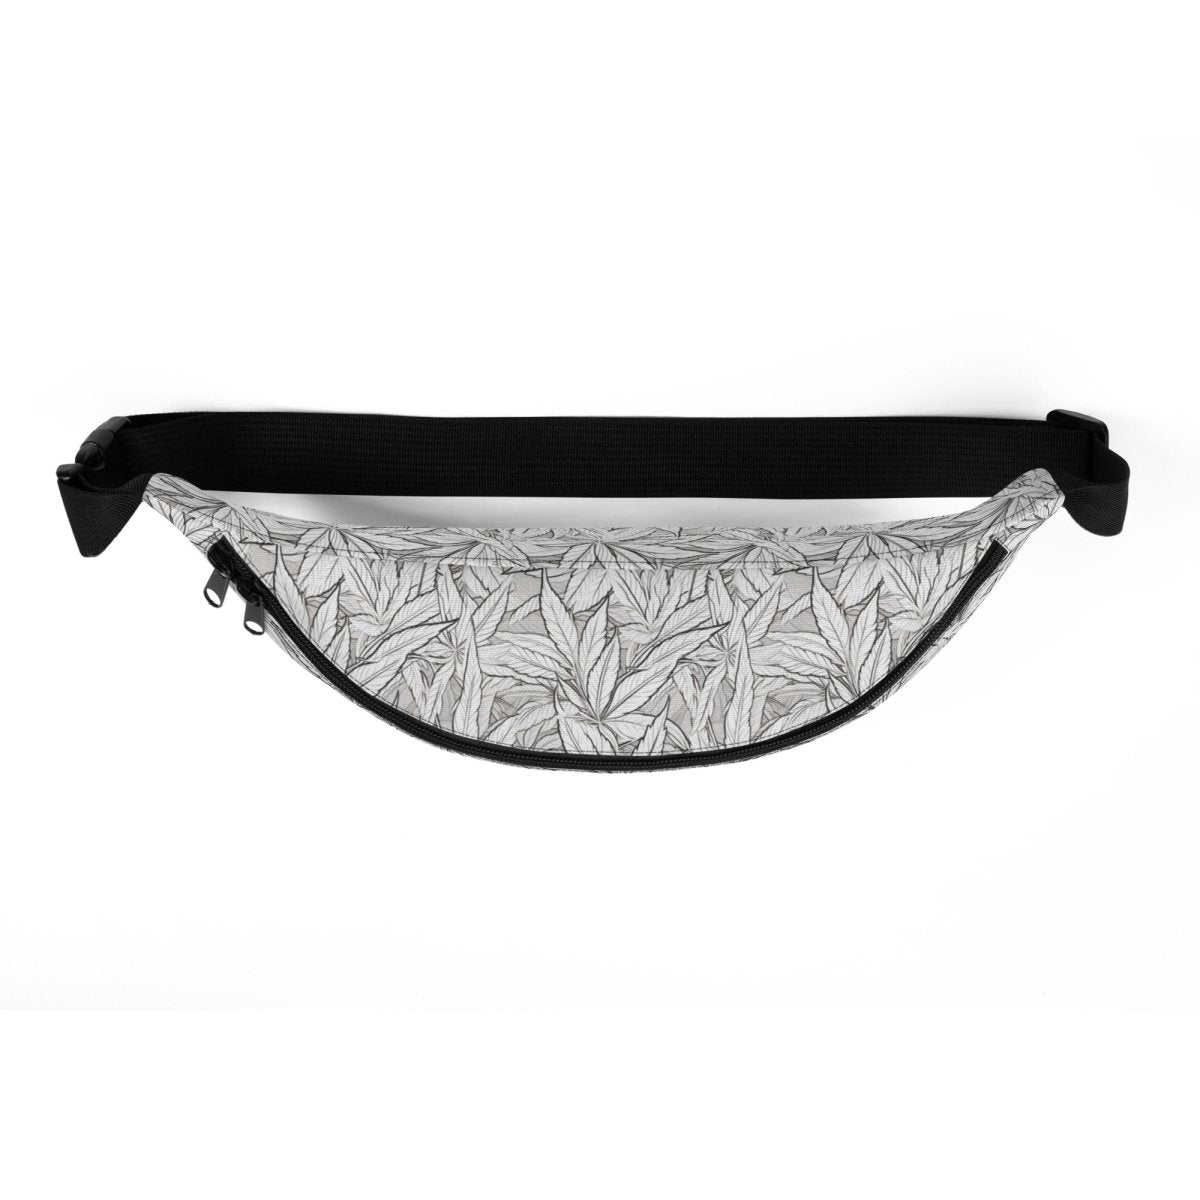 B&W Leaves Fanny Pack - Mainly High